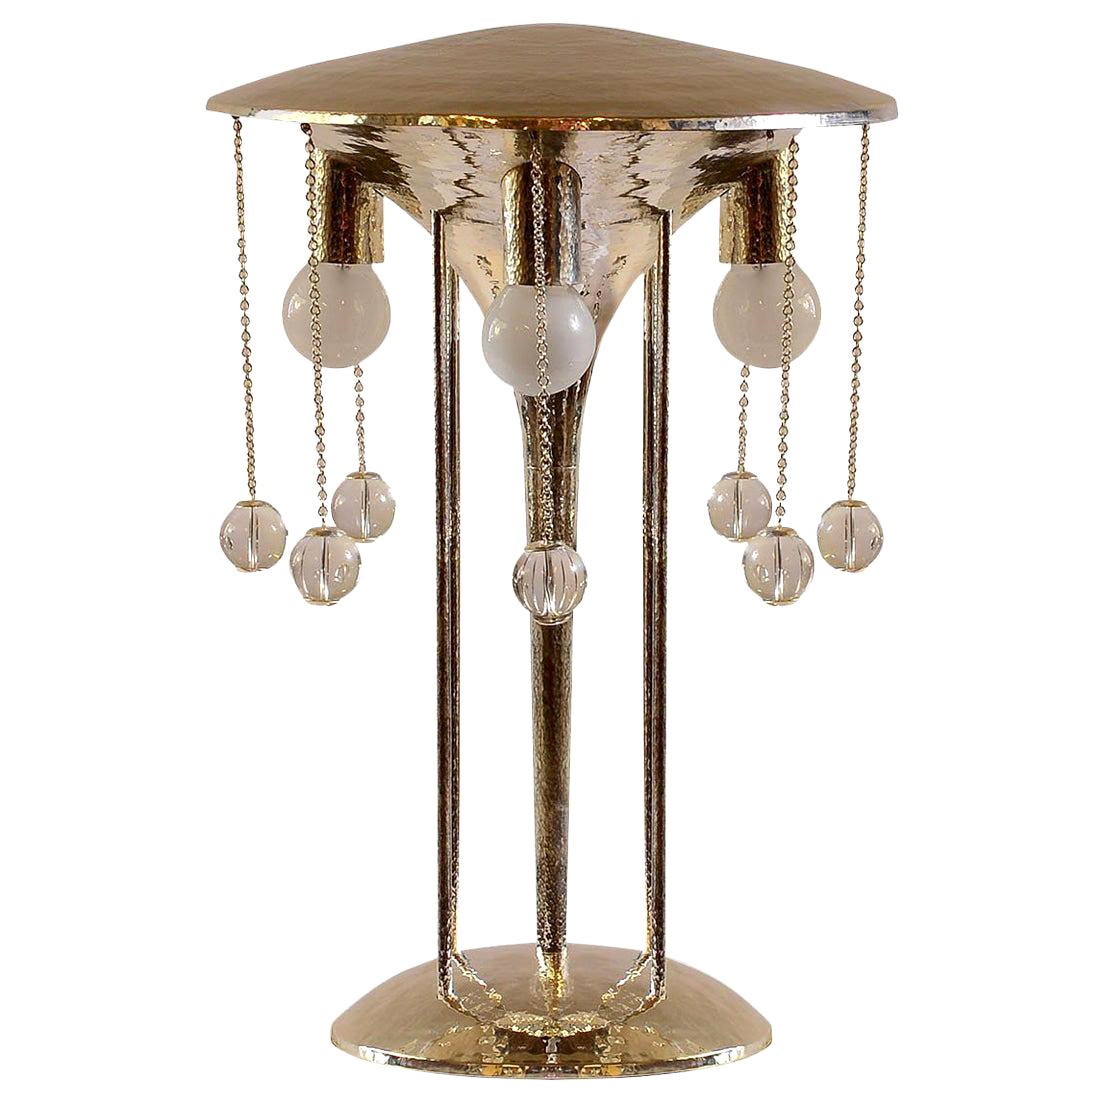 Secessionist J. Hoffmann&Wiener Werkstätte Silvered Brass Table Lamp Re-Edition For Sale